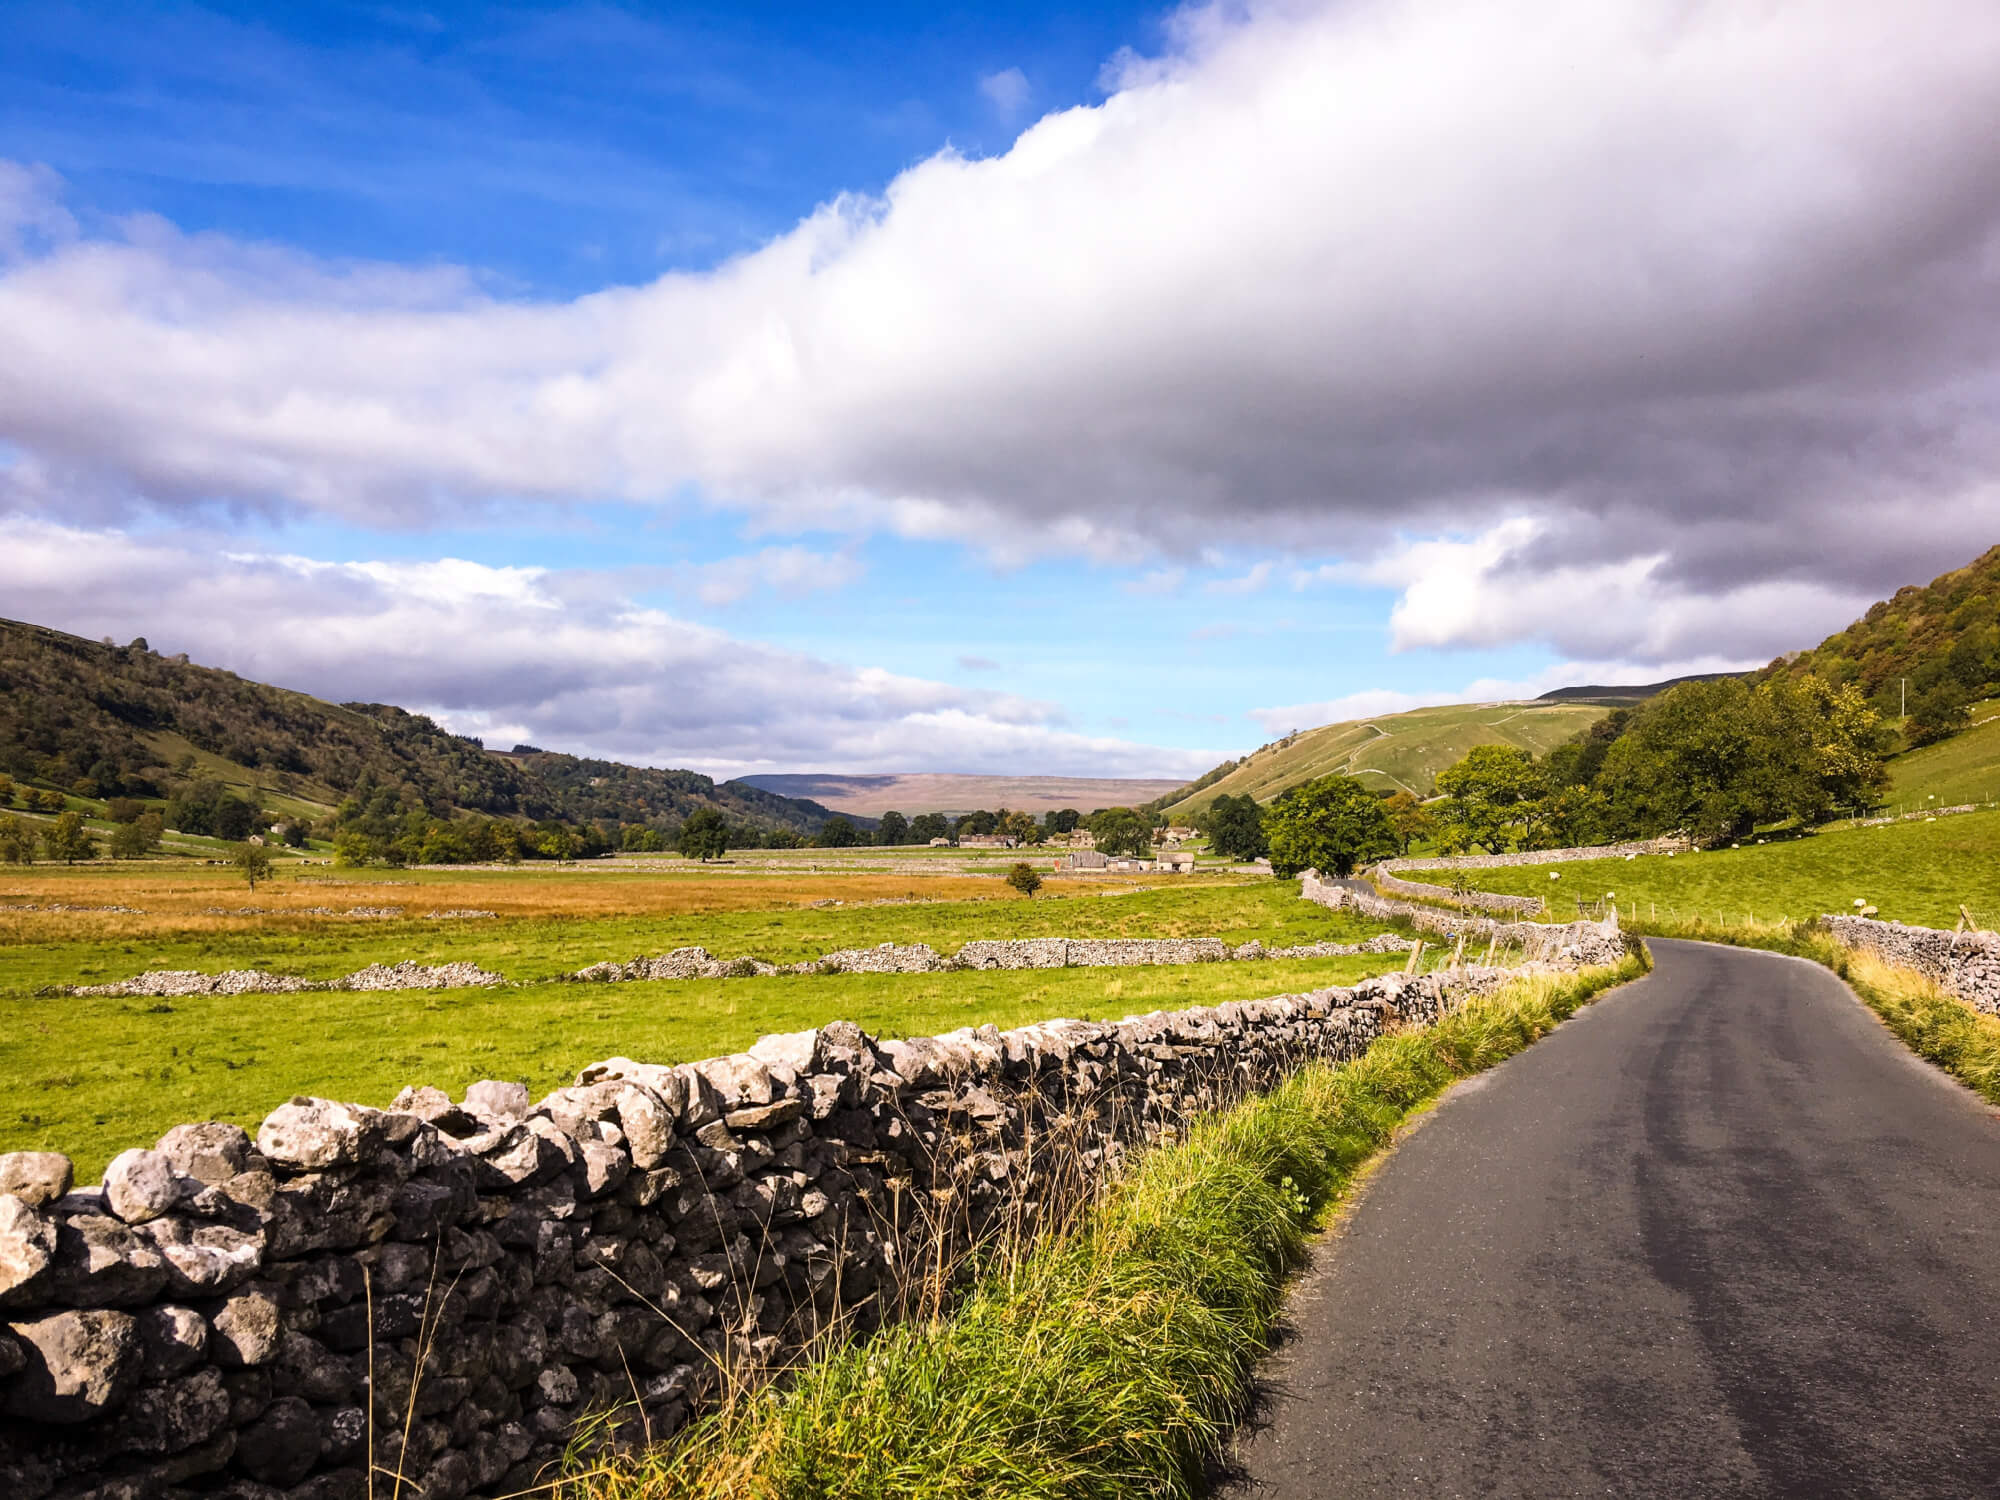 Yorkshire Dales National Park is a must for any top 10 UK National Parks list.